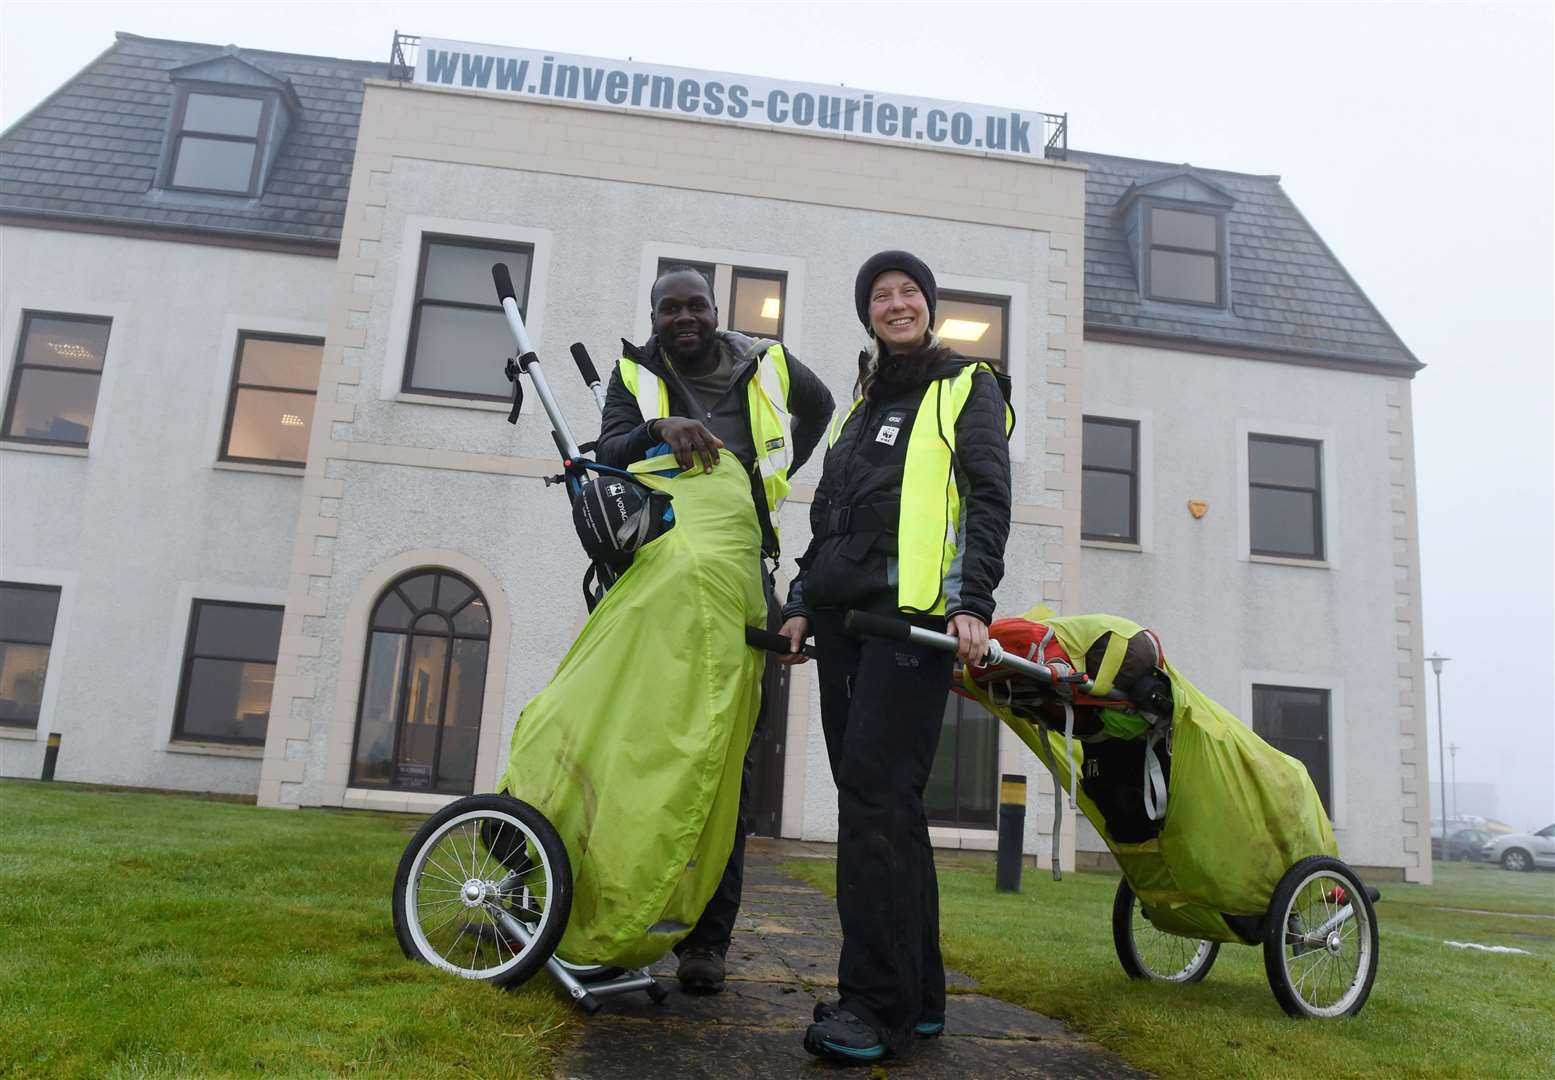 Phoebe Smith and Dwayne Fields stopped at the Inverness Courier's former home on their 1,300km hike across Britain from Dunnet Head Scotland to Lizard Point, Cornwall. Picture: Callum Mackay.